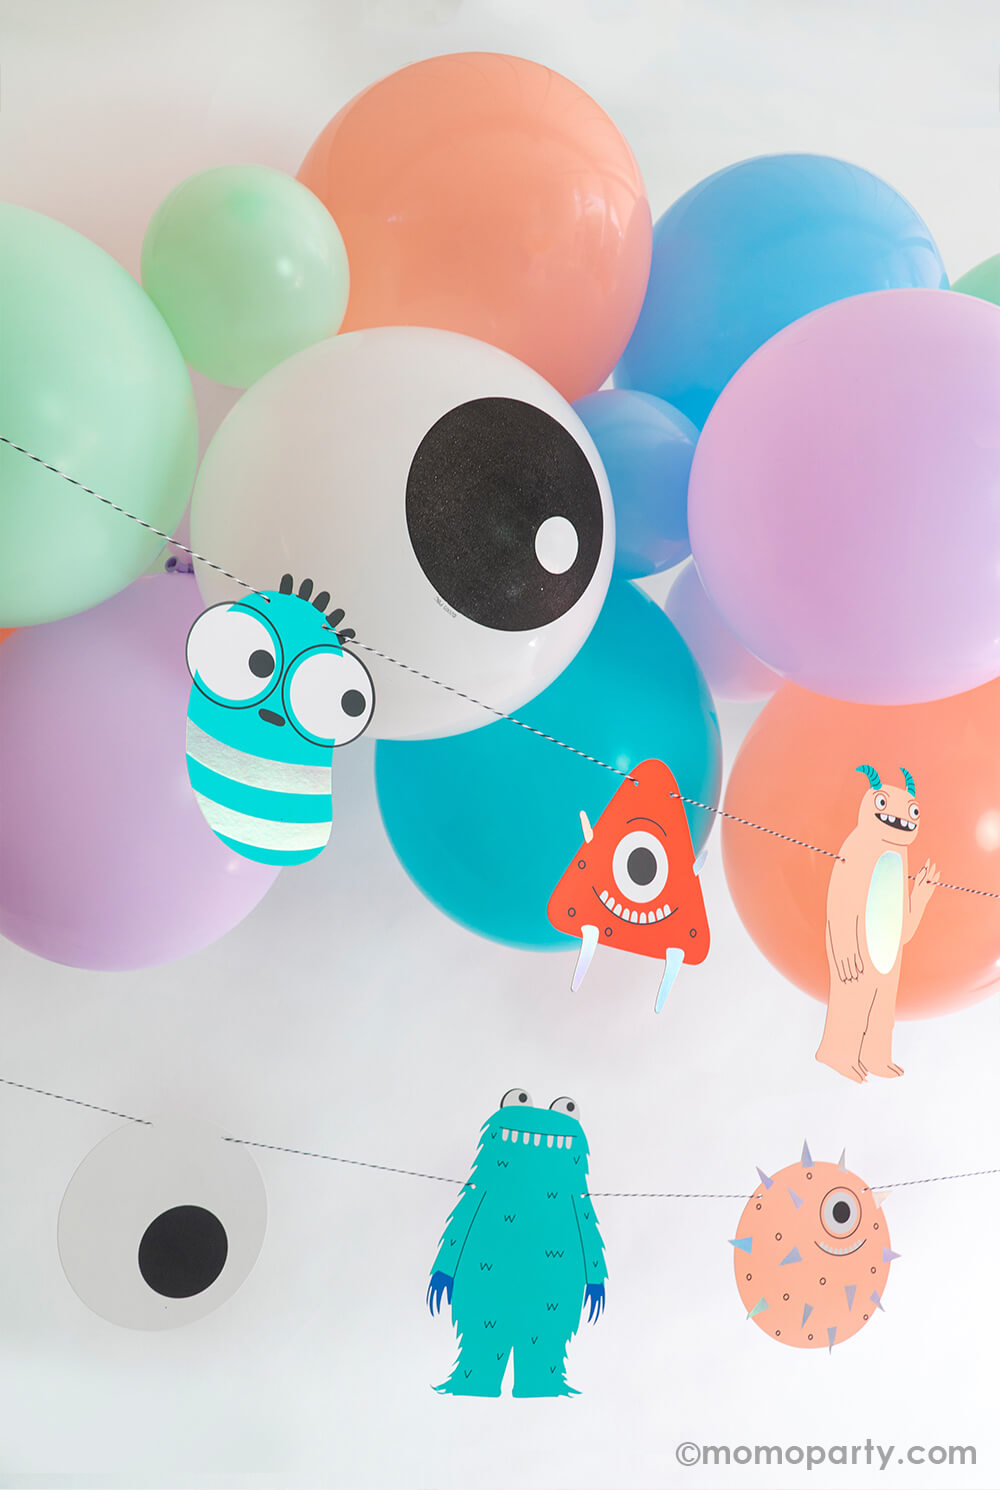  cute balloon garland in cheerful but soft colors of coral, blush, lavender, mint, aqua and pale. With pops of eyeball print balloons and this adorable purple monster foil balloon, it sets the monster theme for the party but with a friendly vibe for the little ones!